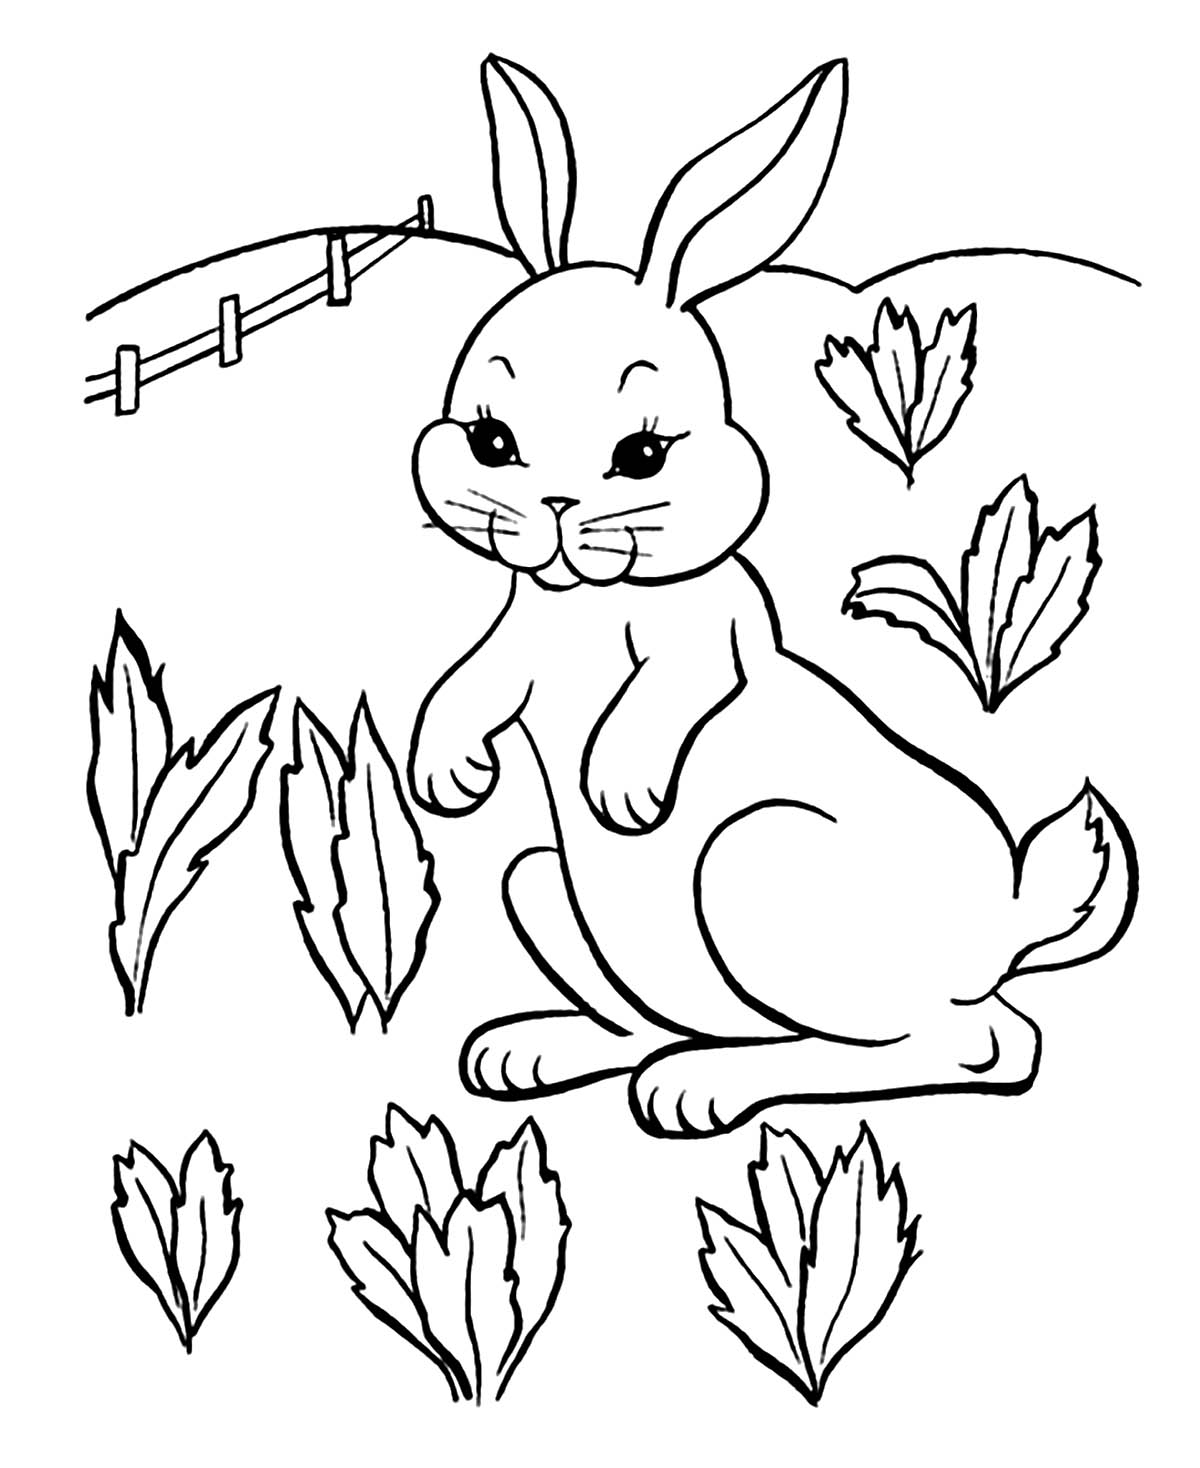 Free Rabbit Coloring Pages Rabbit To Download For Free Rabbit Kids Coloring Pages